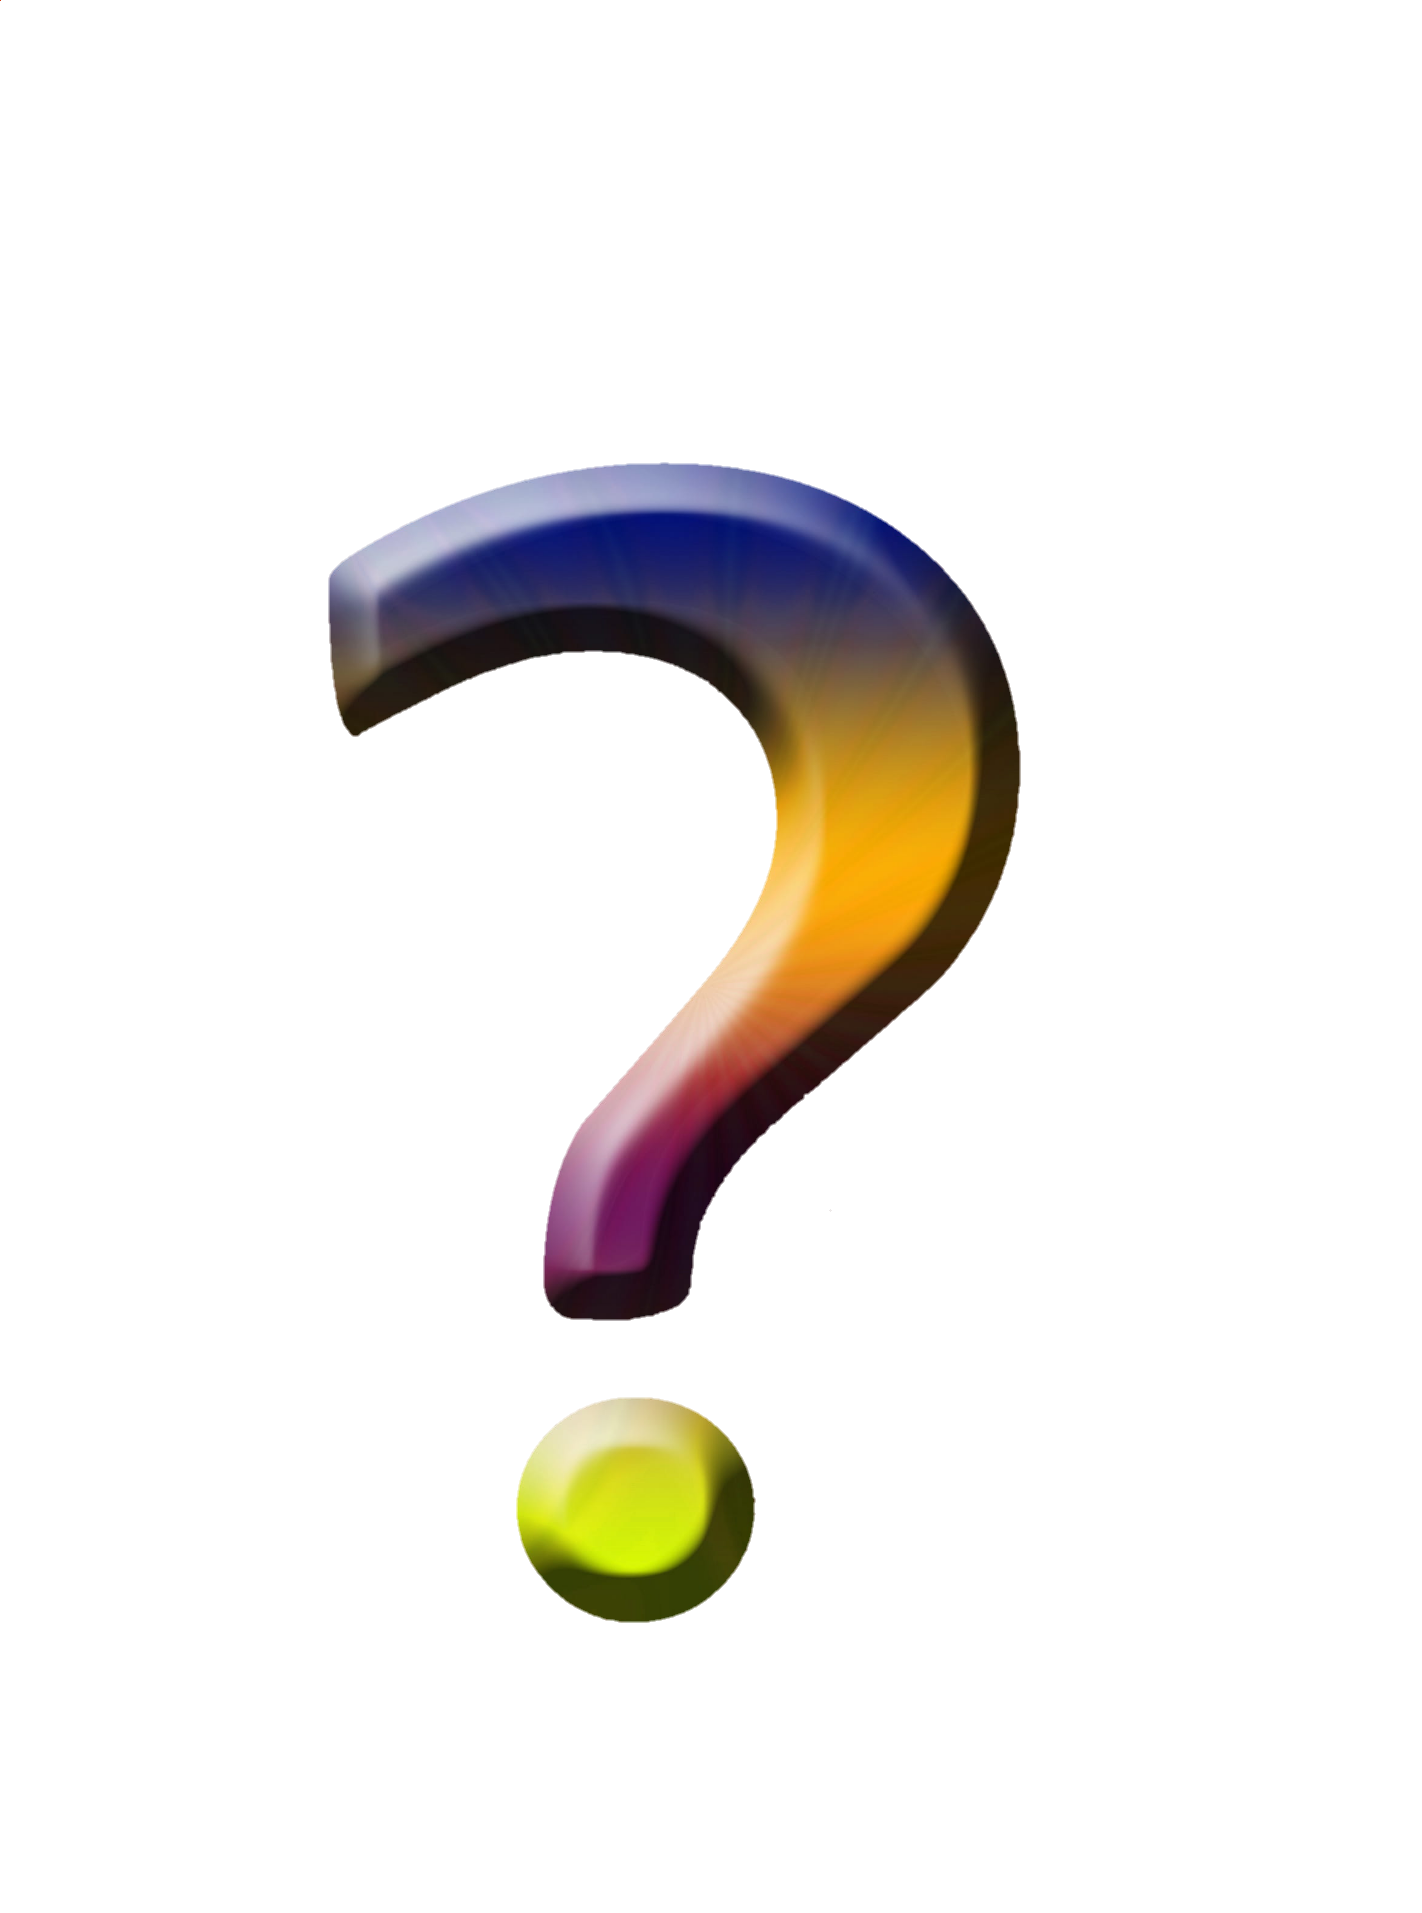 question-mark-png-from-pngfre-34-1